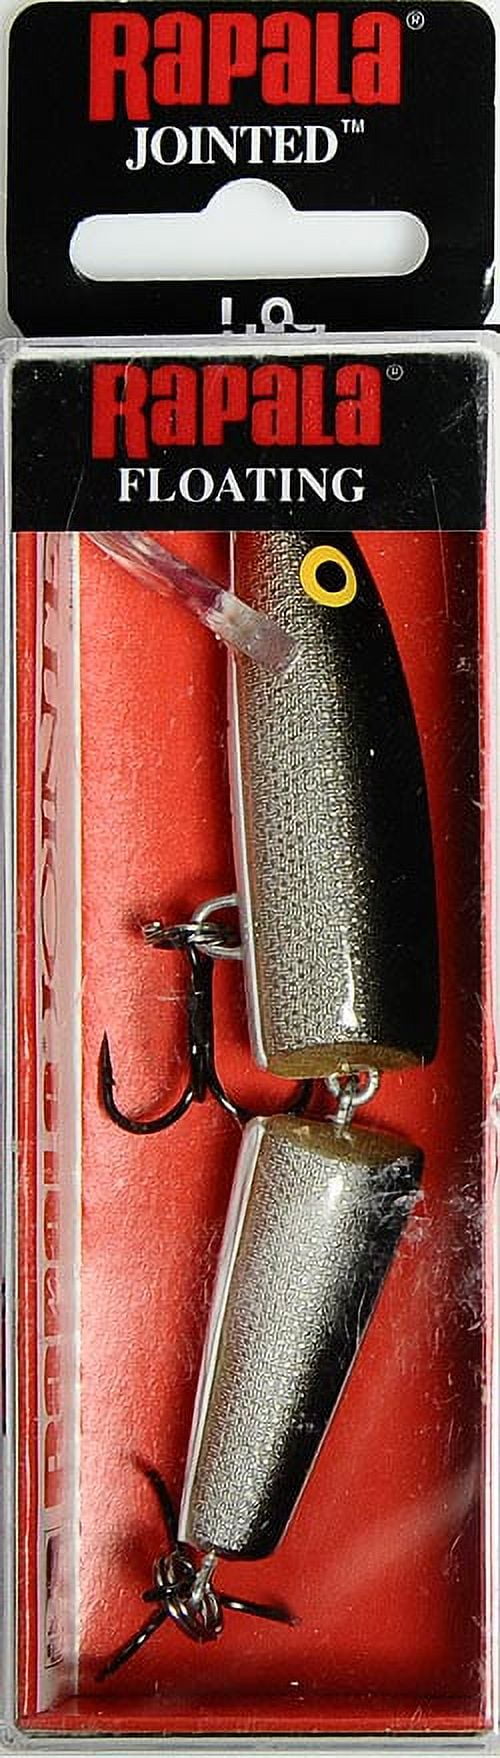 Rapala Jointed Minnow 09 Fishing Lure 3.5 1/4oz Silver